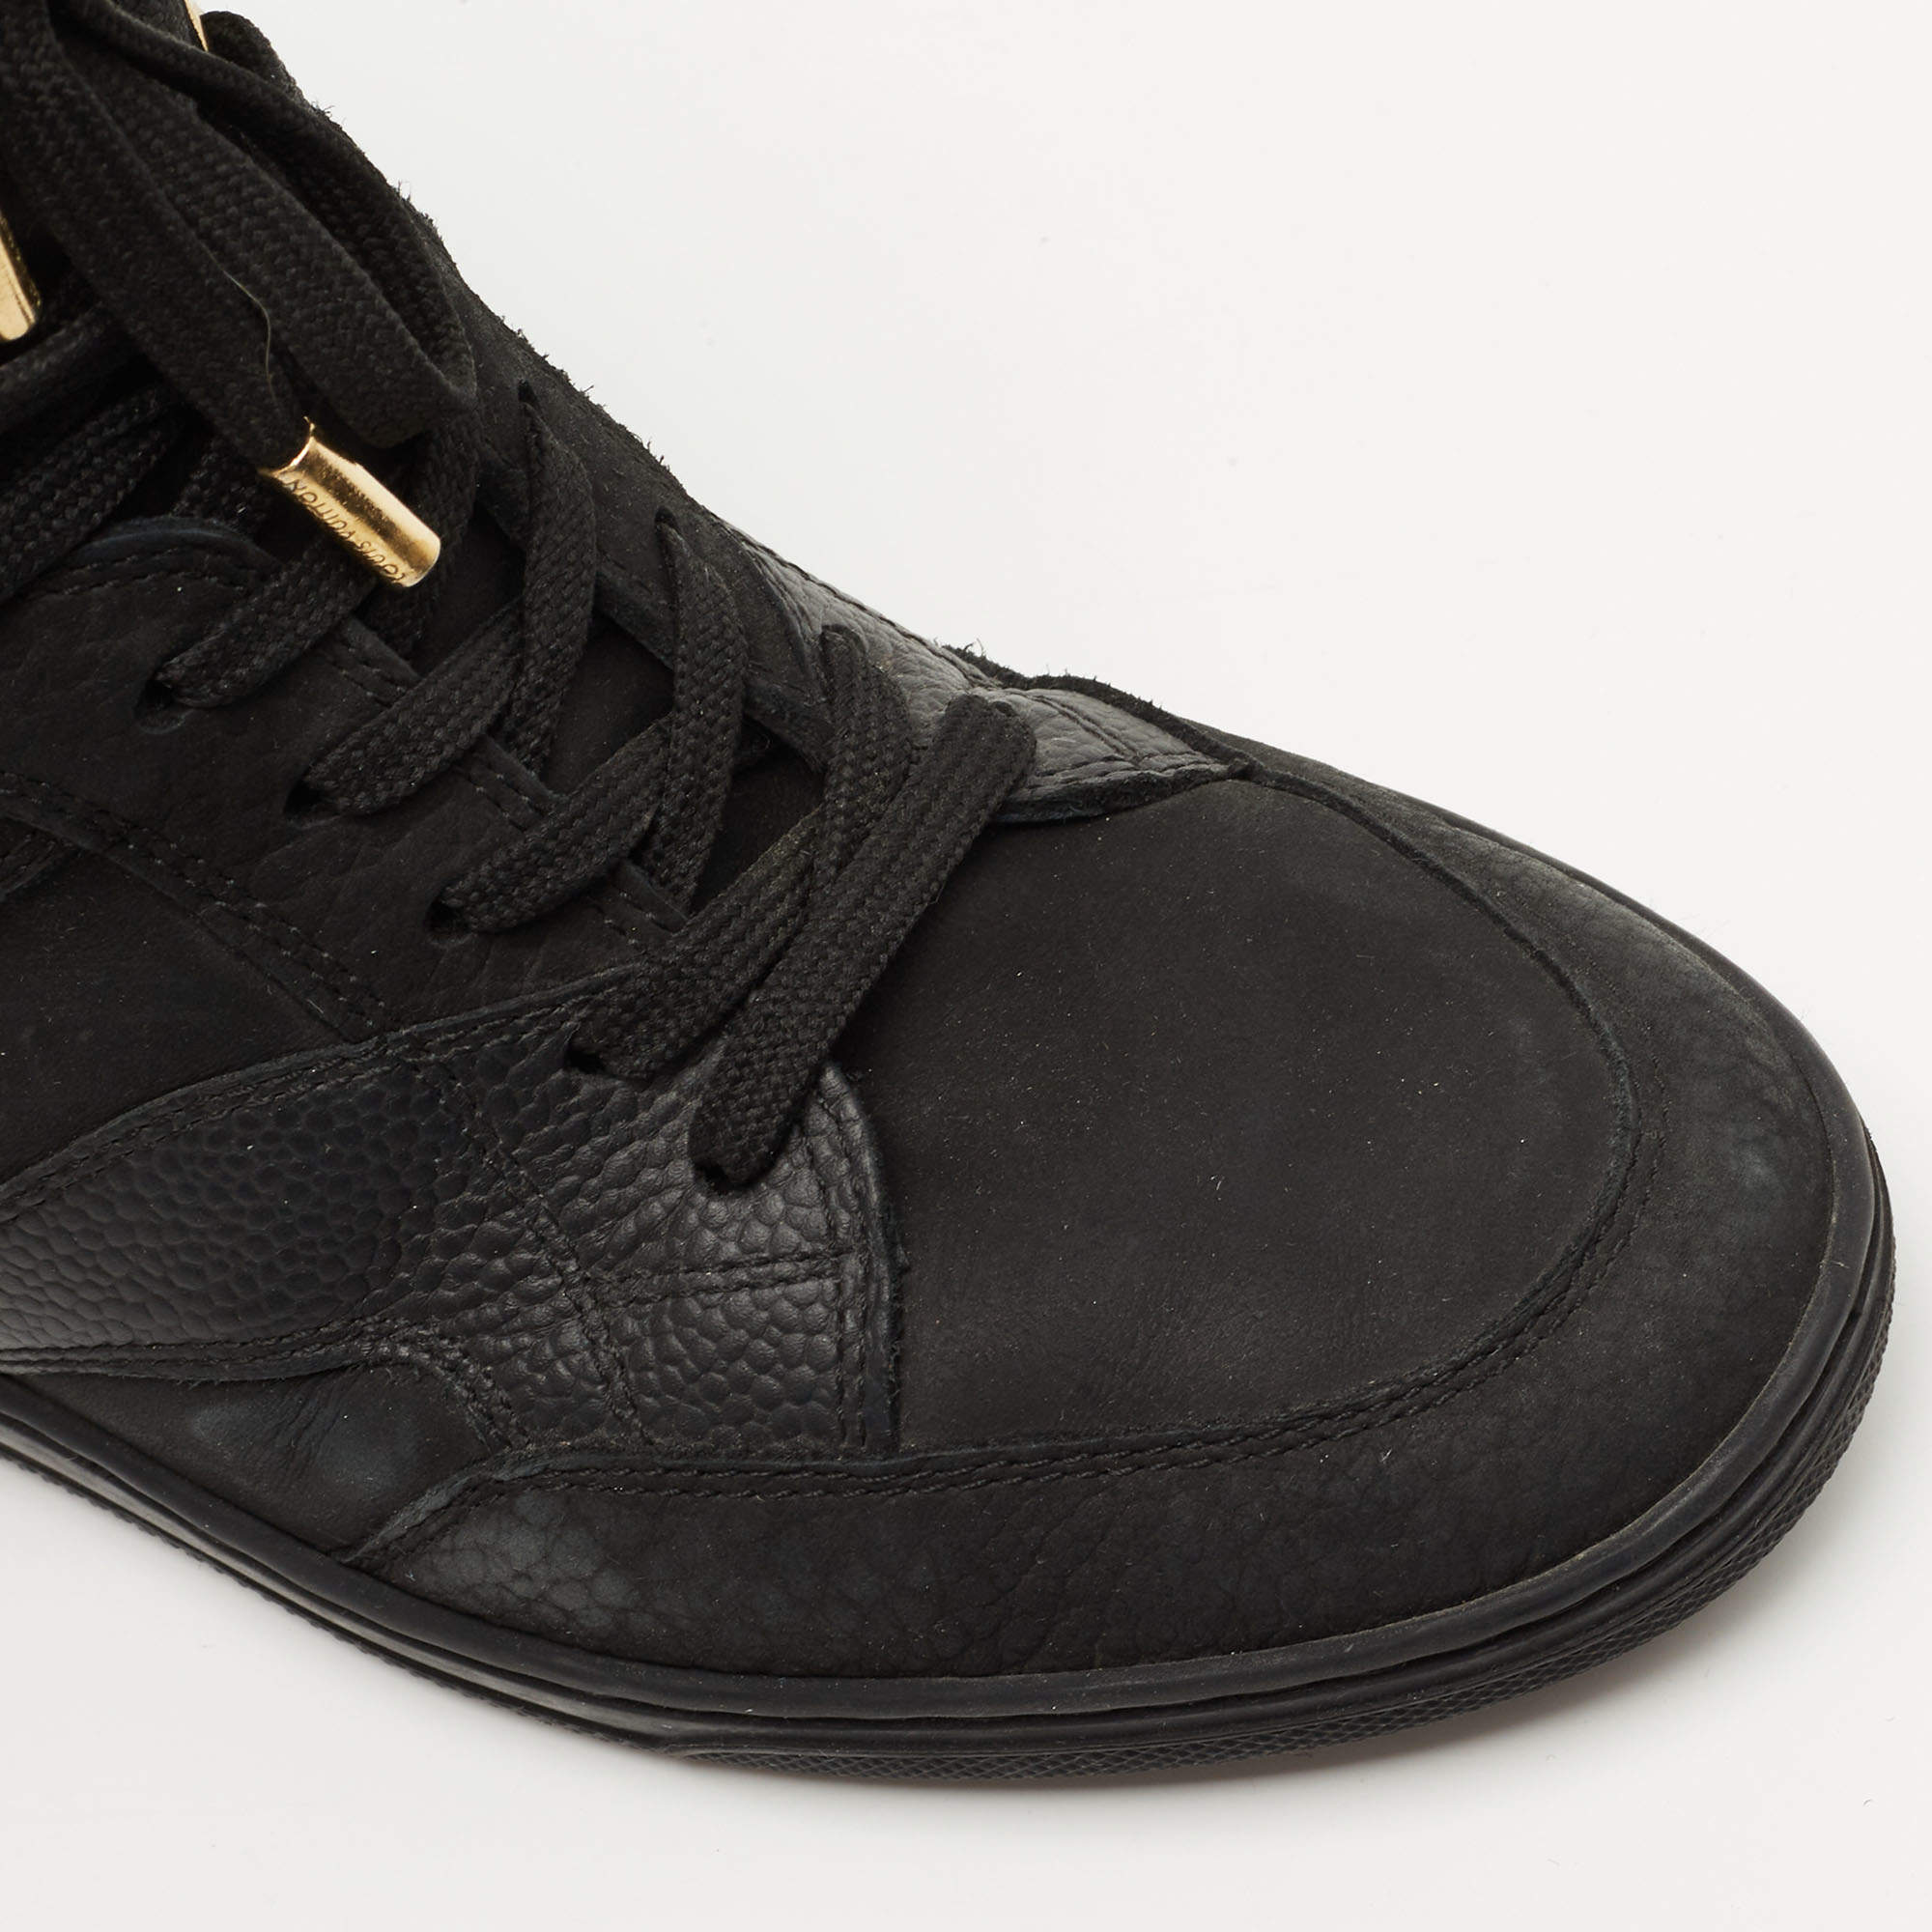 Stellar leather trainers Louis Vuitton Black size 37 EU in Leather -  28891683